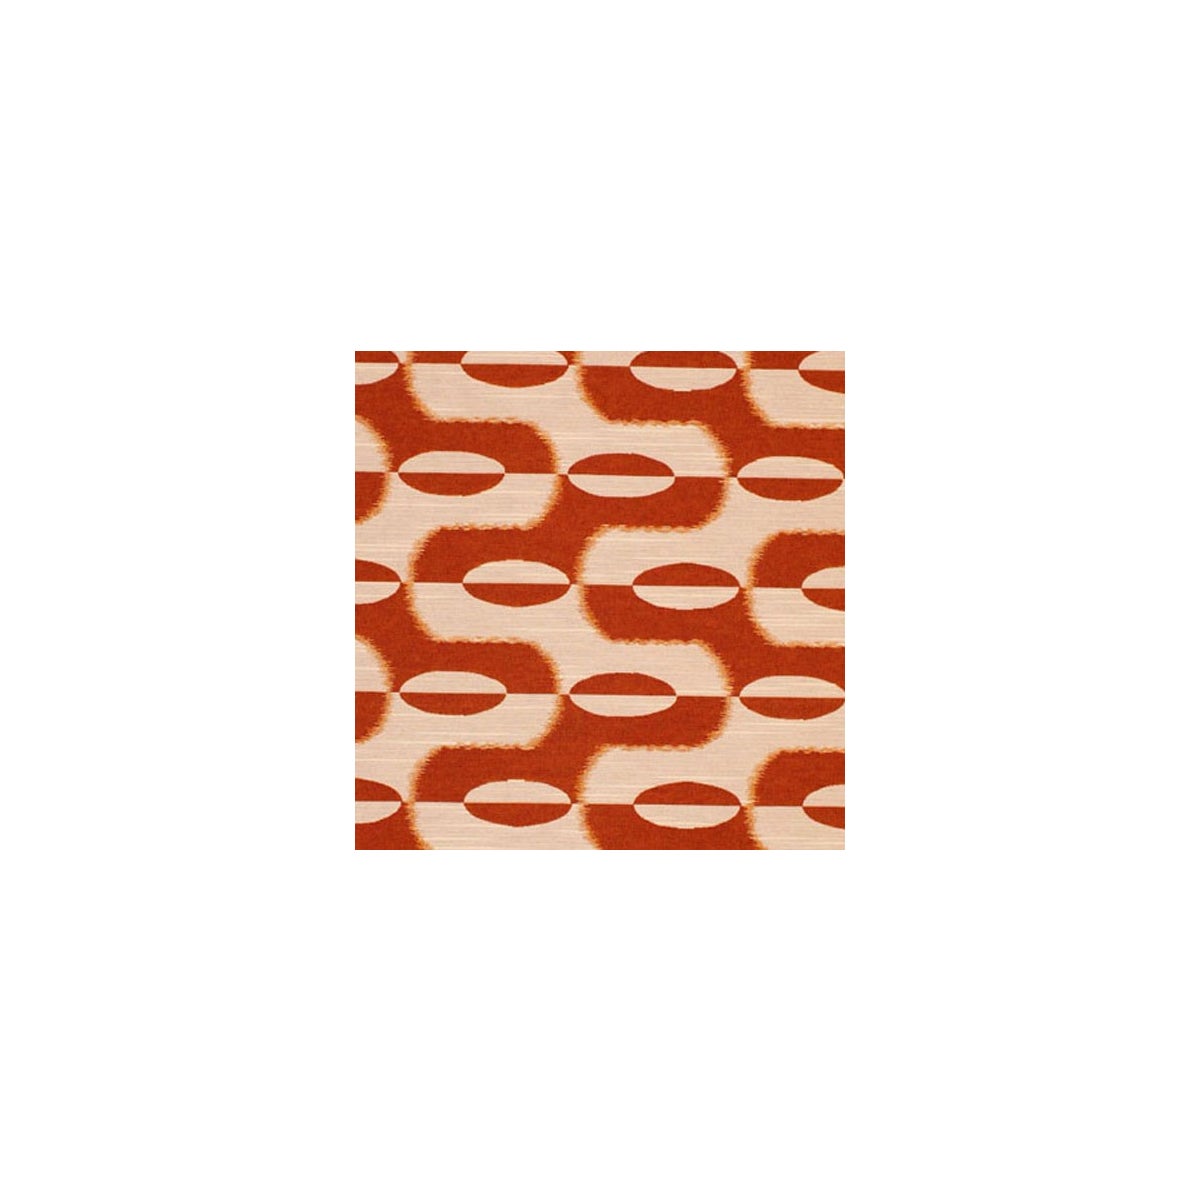 Acoma * - Tangerine - Fabric By the Yard